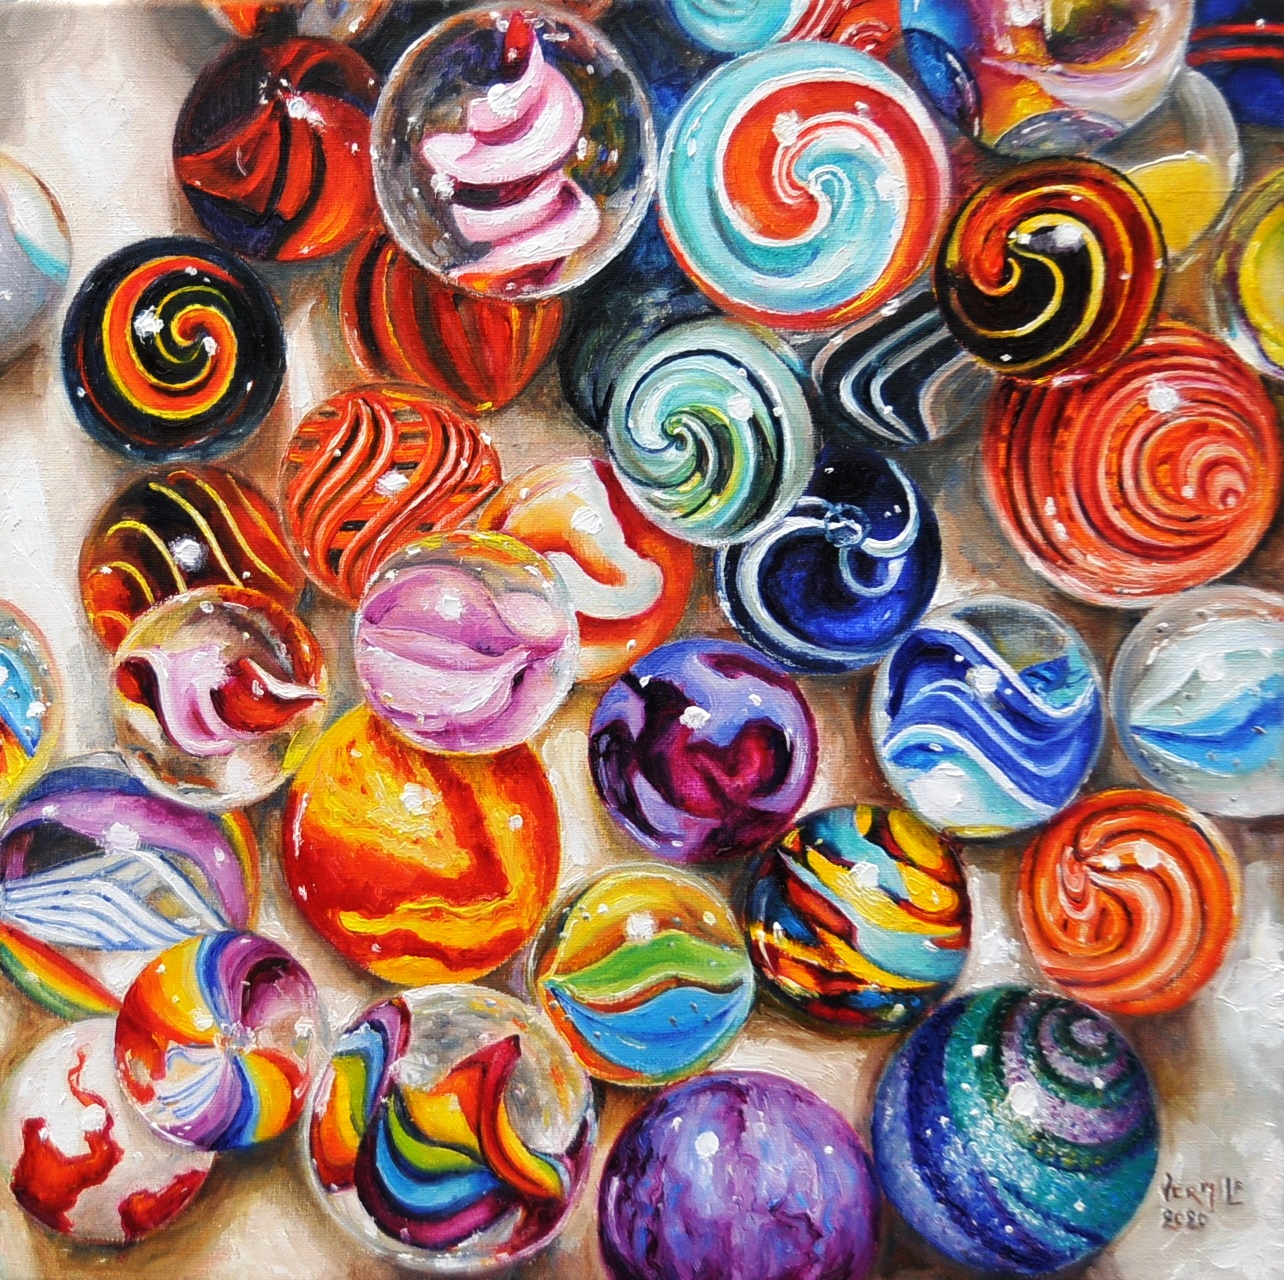 Marbles 4 | Oil paint on linen | Year: 2020 | Dimensions: 40x40cm